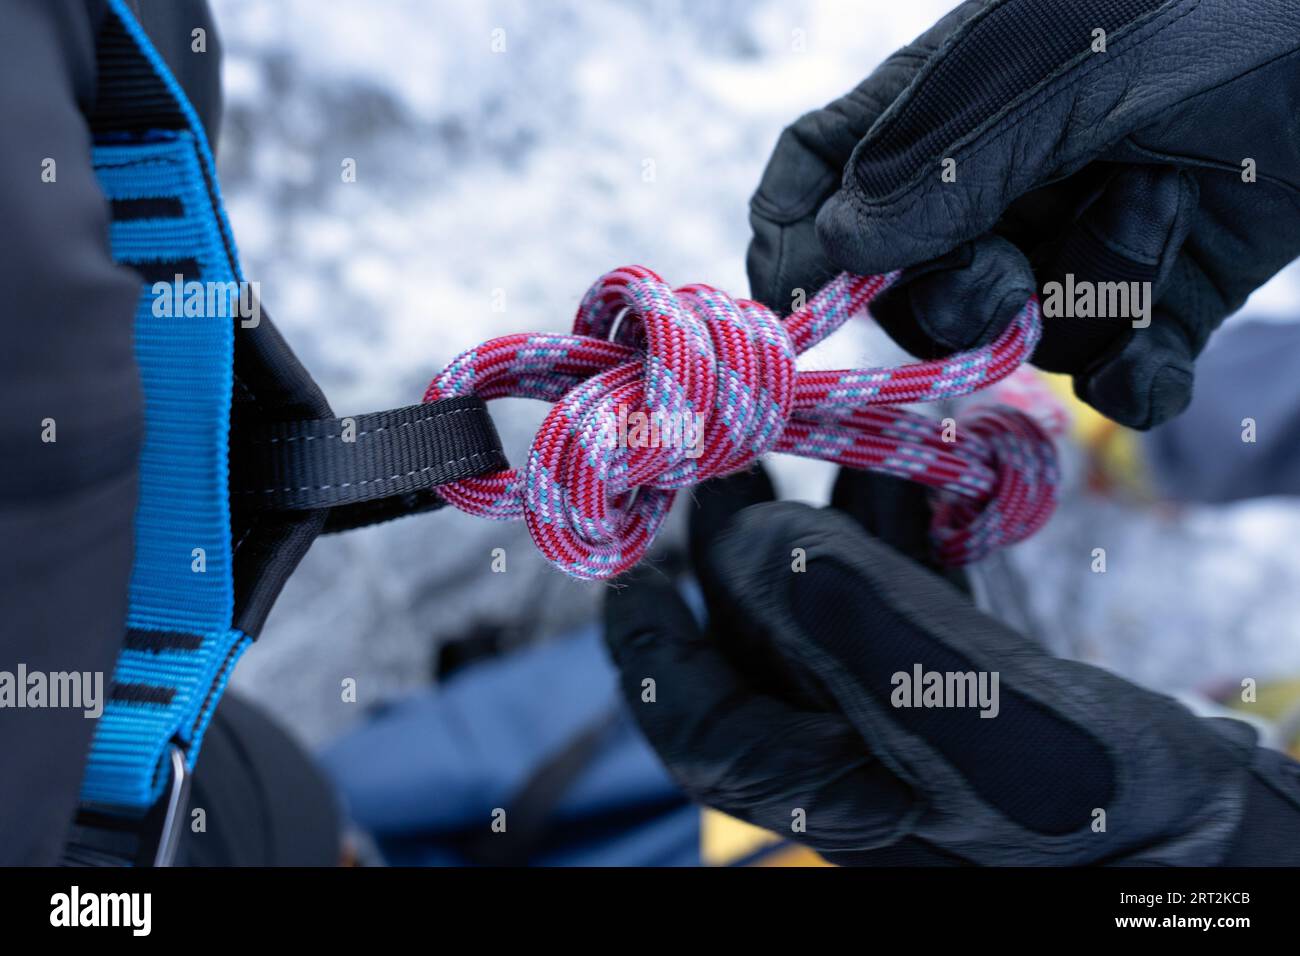 https://c8.alamy.com/comp/2RT2KCB/mountaineer-wearing-the-harness-knotting-the-climbing-rope-to-climb-the-mountain-glacier-to-the-peak-close-up-details-gran-paradiso-national-park-2RT2KCB.jpg